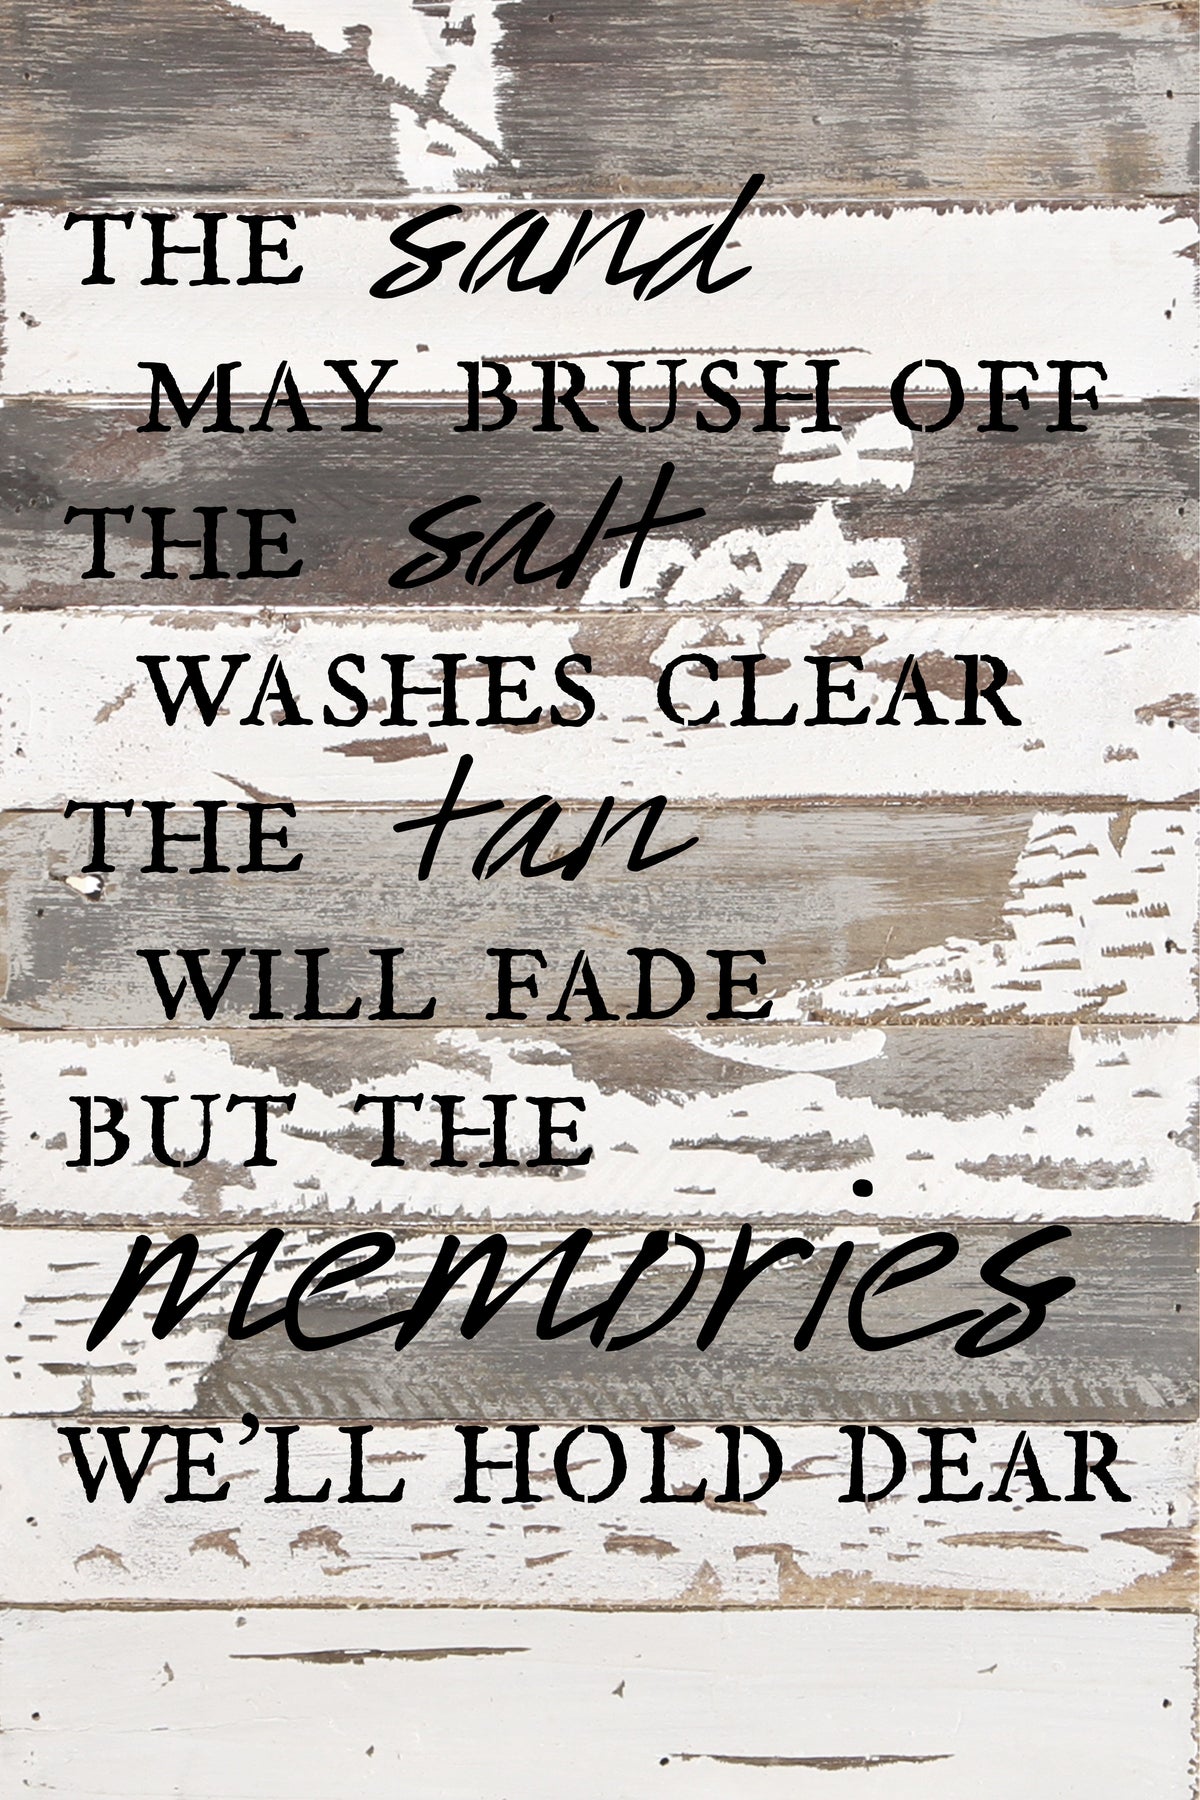 The sand may brush off. The salt washes clear. The tan will fade. But the memories we'll hold dear. / 12x18 Reclaimed Wood Wall Art